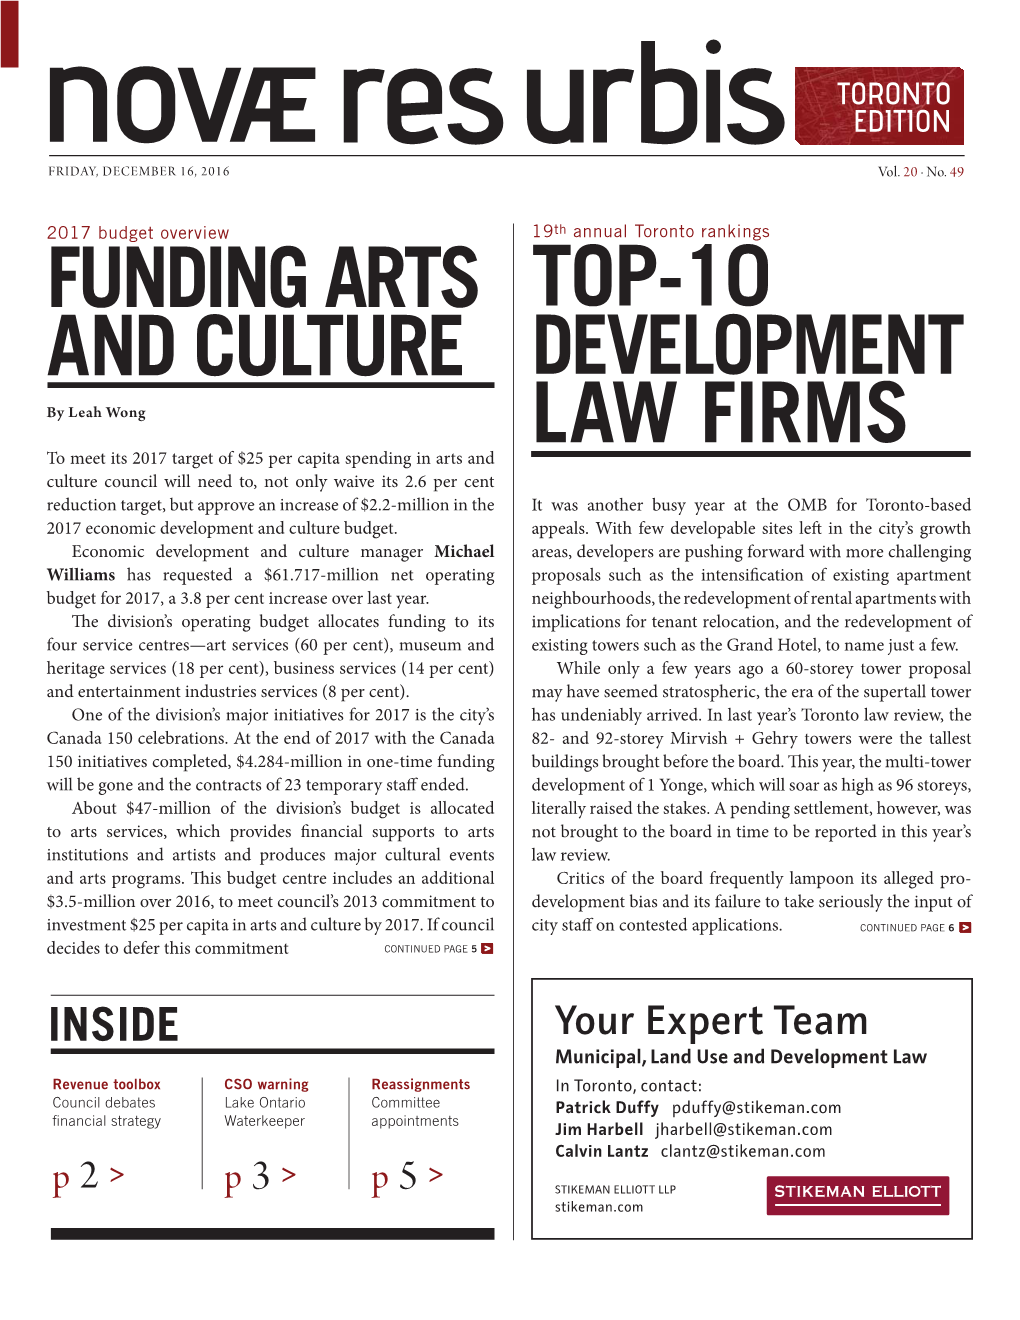 Funding Arts and Culture Top-10 Law Firms